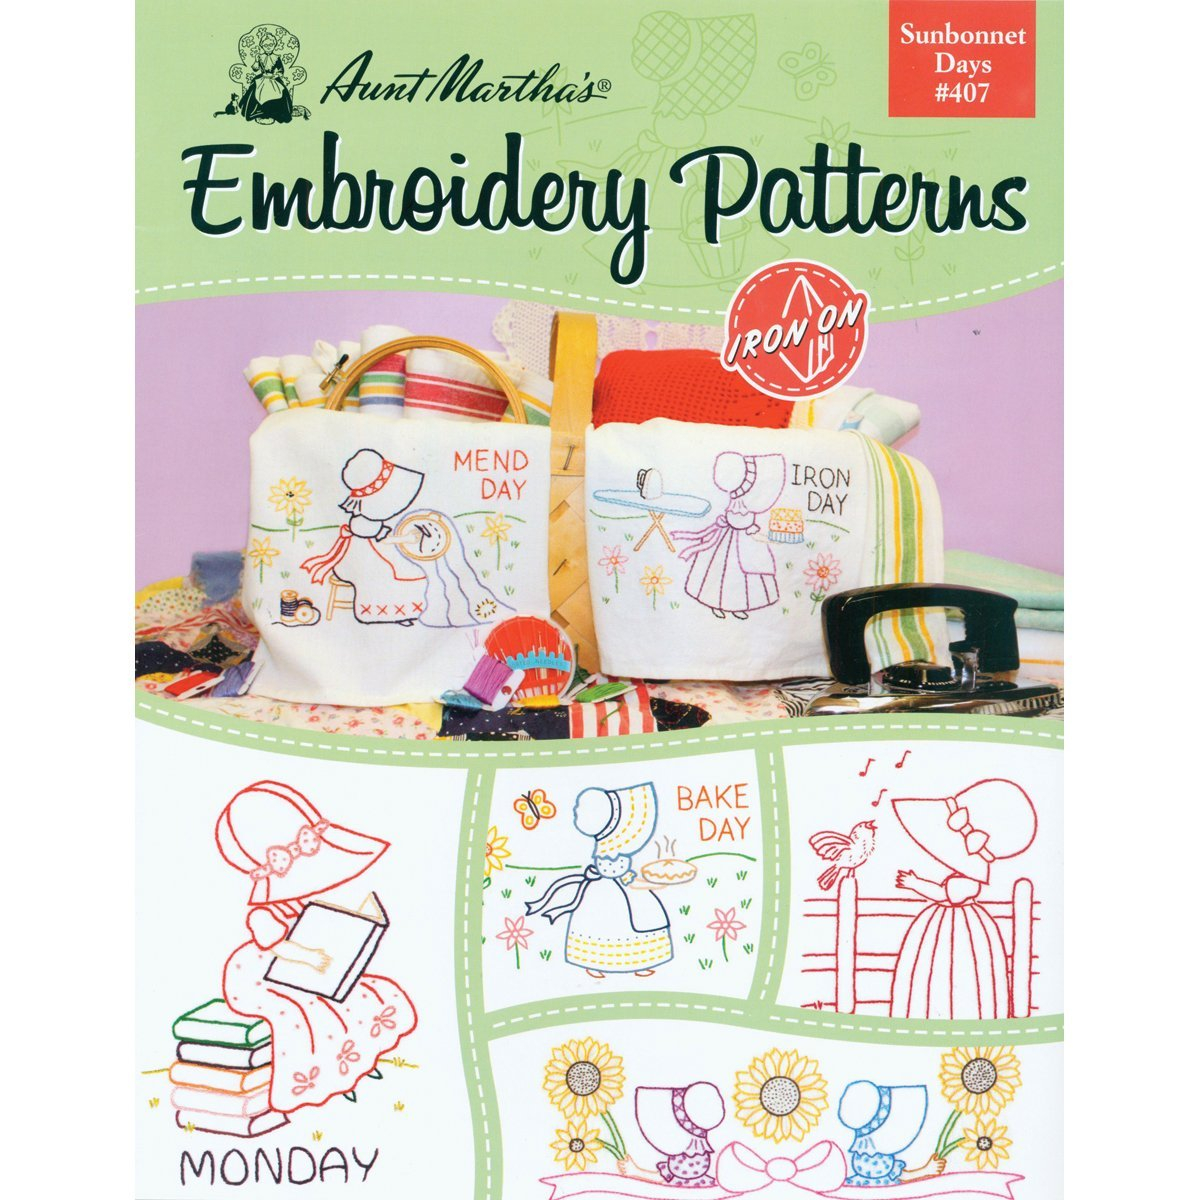 Hand Embroidery Transfer Patterns Aunt Marthas Sunbonnet Days Embroidery Transfer Pattern Book Kit Designs Include Various Sunbonnet Girl Designs As Well As 2 Pillowcase Hem